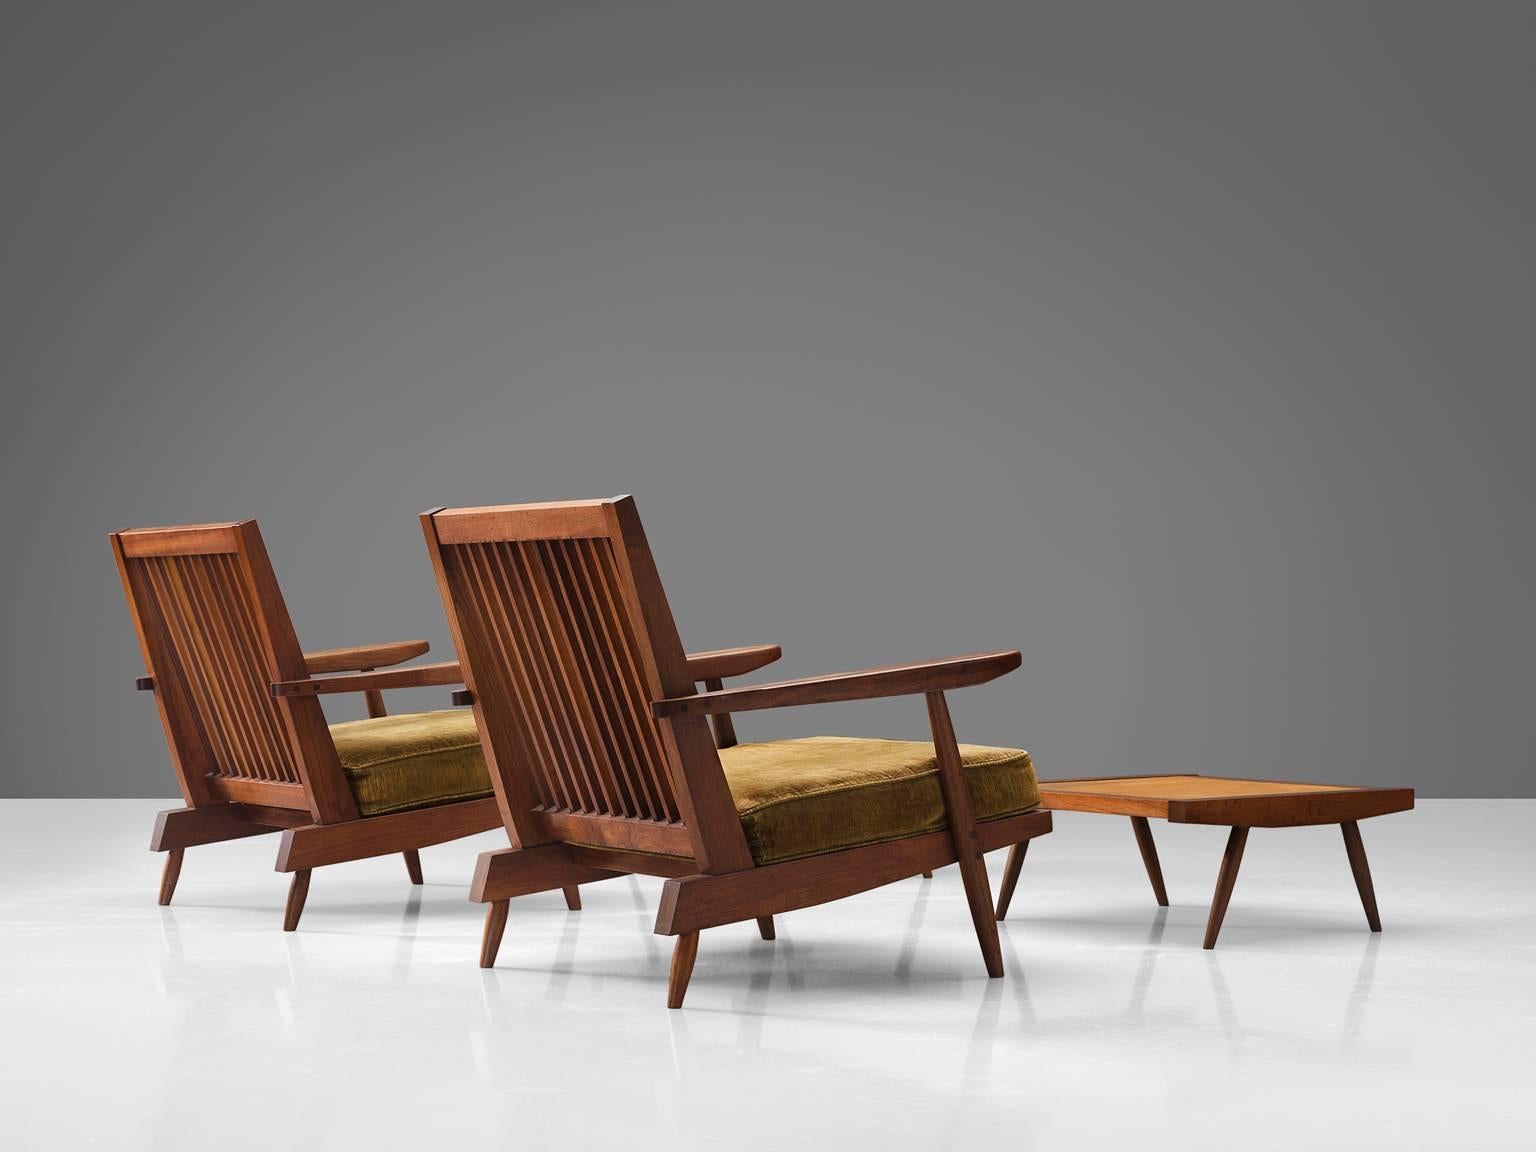 George Nakashima, armchairs, walnut, green to ocre fabric, United States, design ca. 1950

These quintessential spindleback armchairs and ottomans are designed by Nakashima. The chairs feature spindles at the back, referring with this detail to the